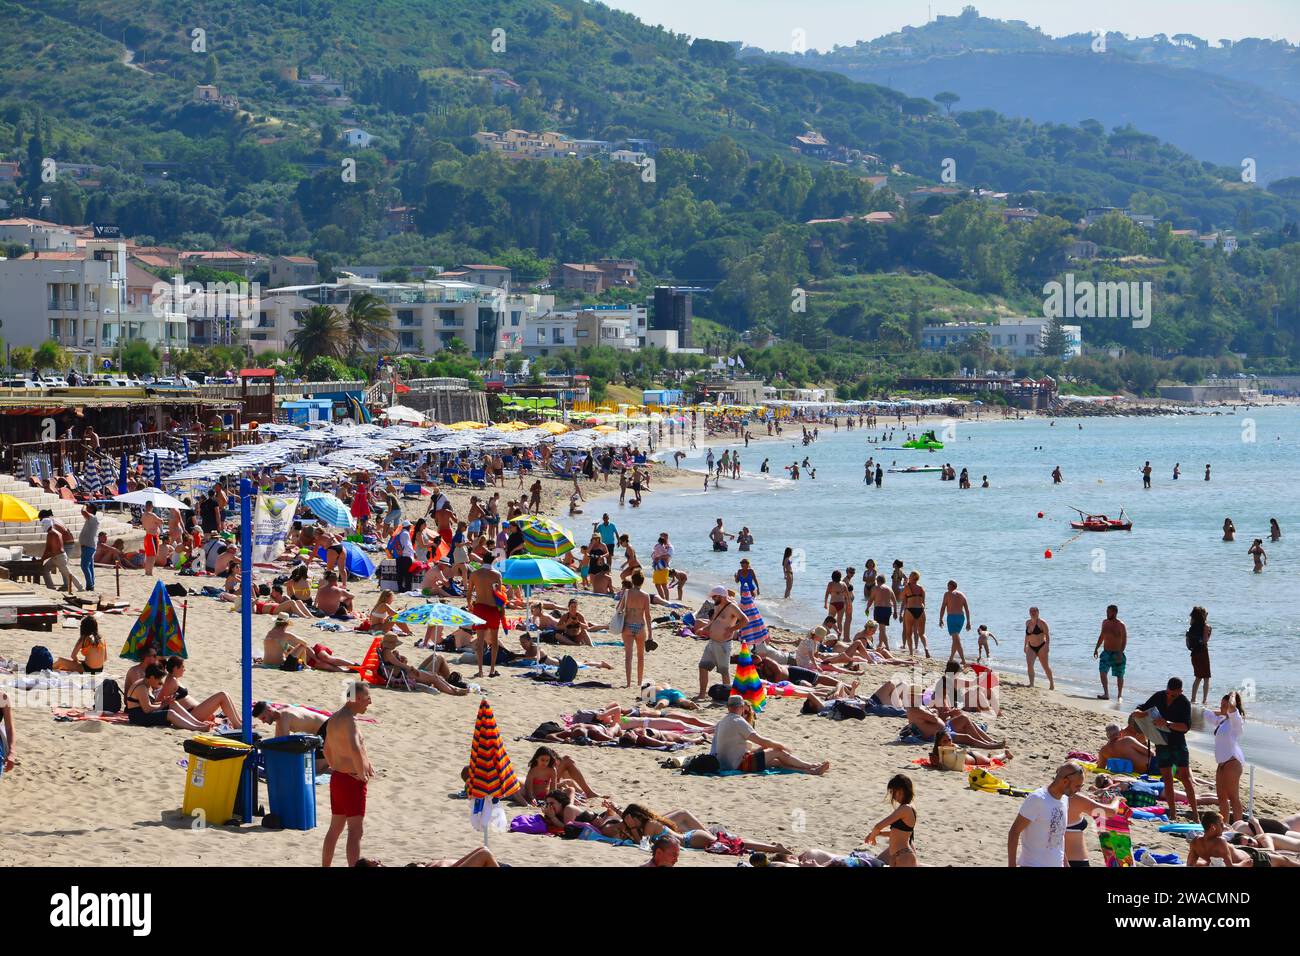 Summer day on a crowded beach in Cefalu with crystal blue water and green hills in the background. Stock Photo